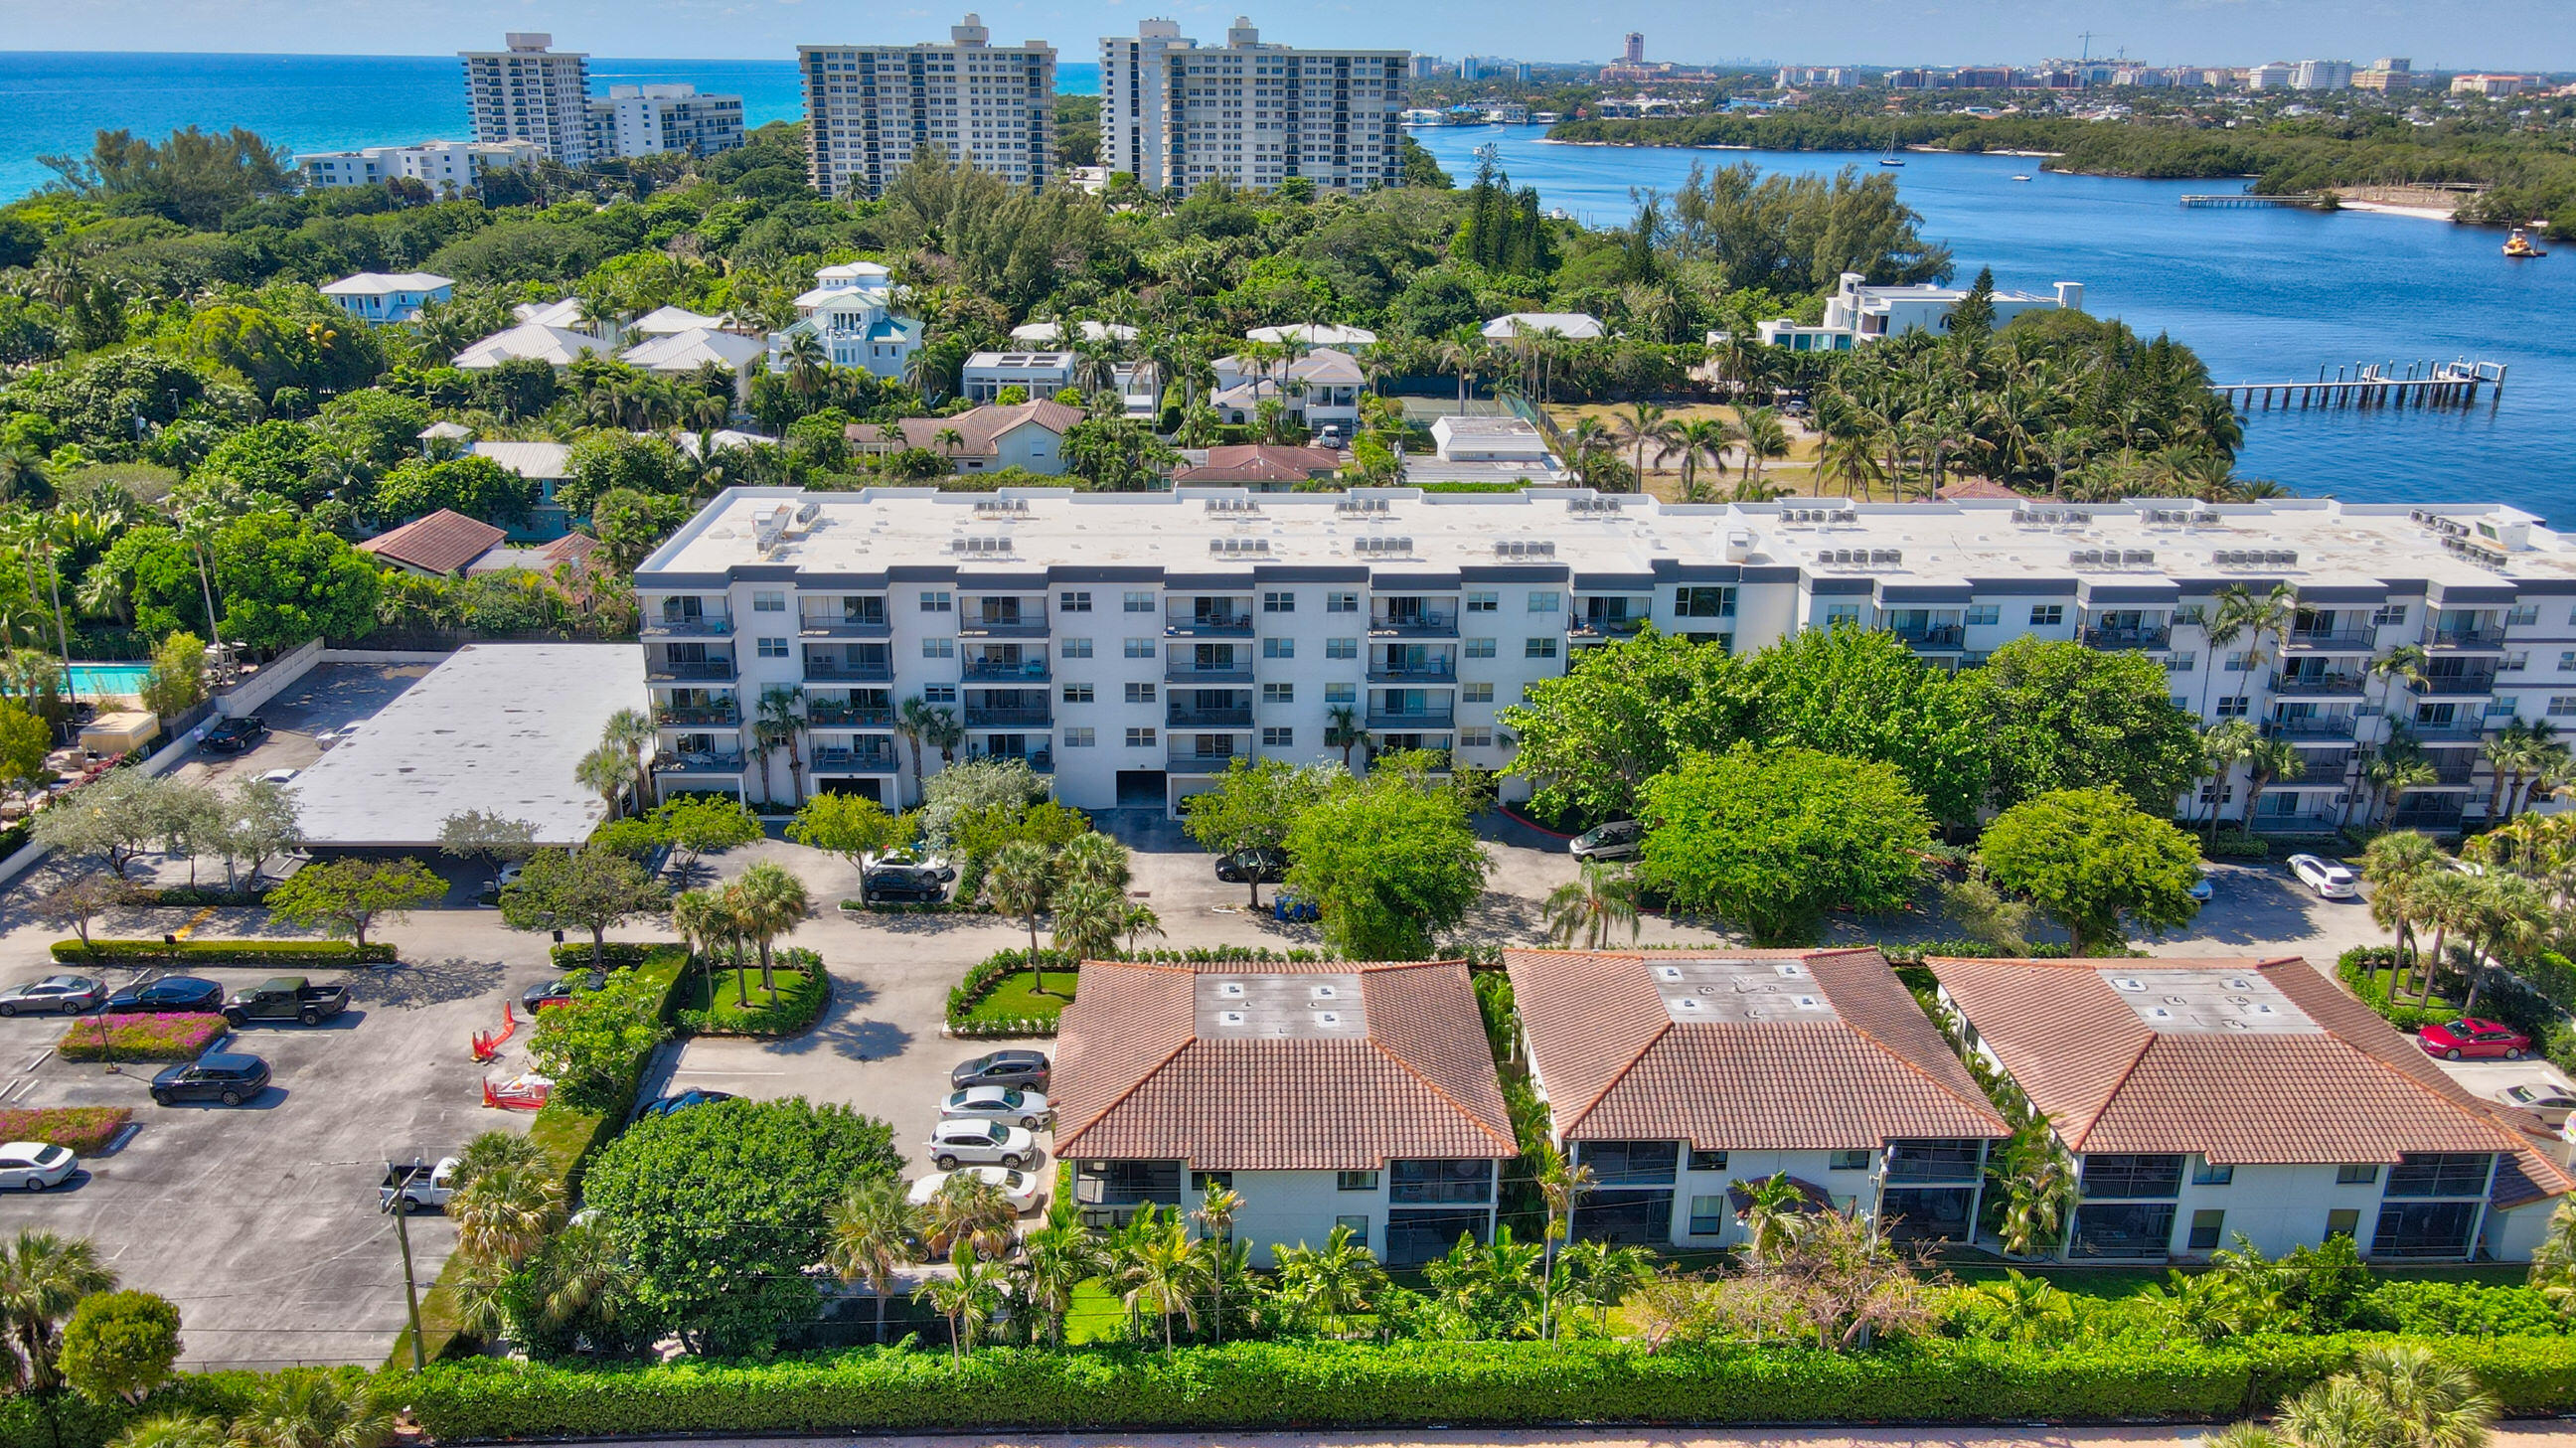 941 Sweetwater Lane, Unit #206, Boca Raton, Florida, 33431, United States, 2 Bedrooms Bedrooms, ,2 BathroomsBathrooms,Residential,For Sale,941 Sweetwater Lane, Unit #206,1511979